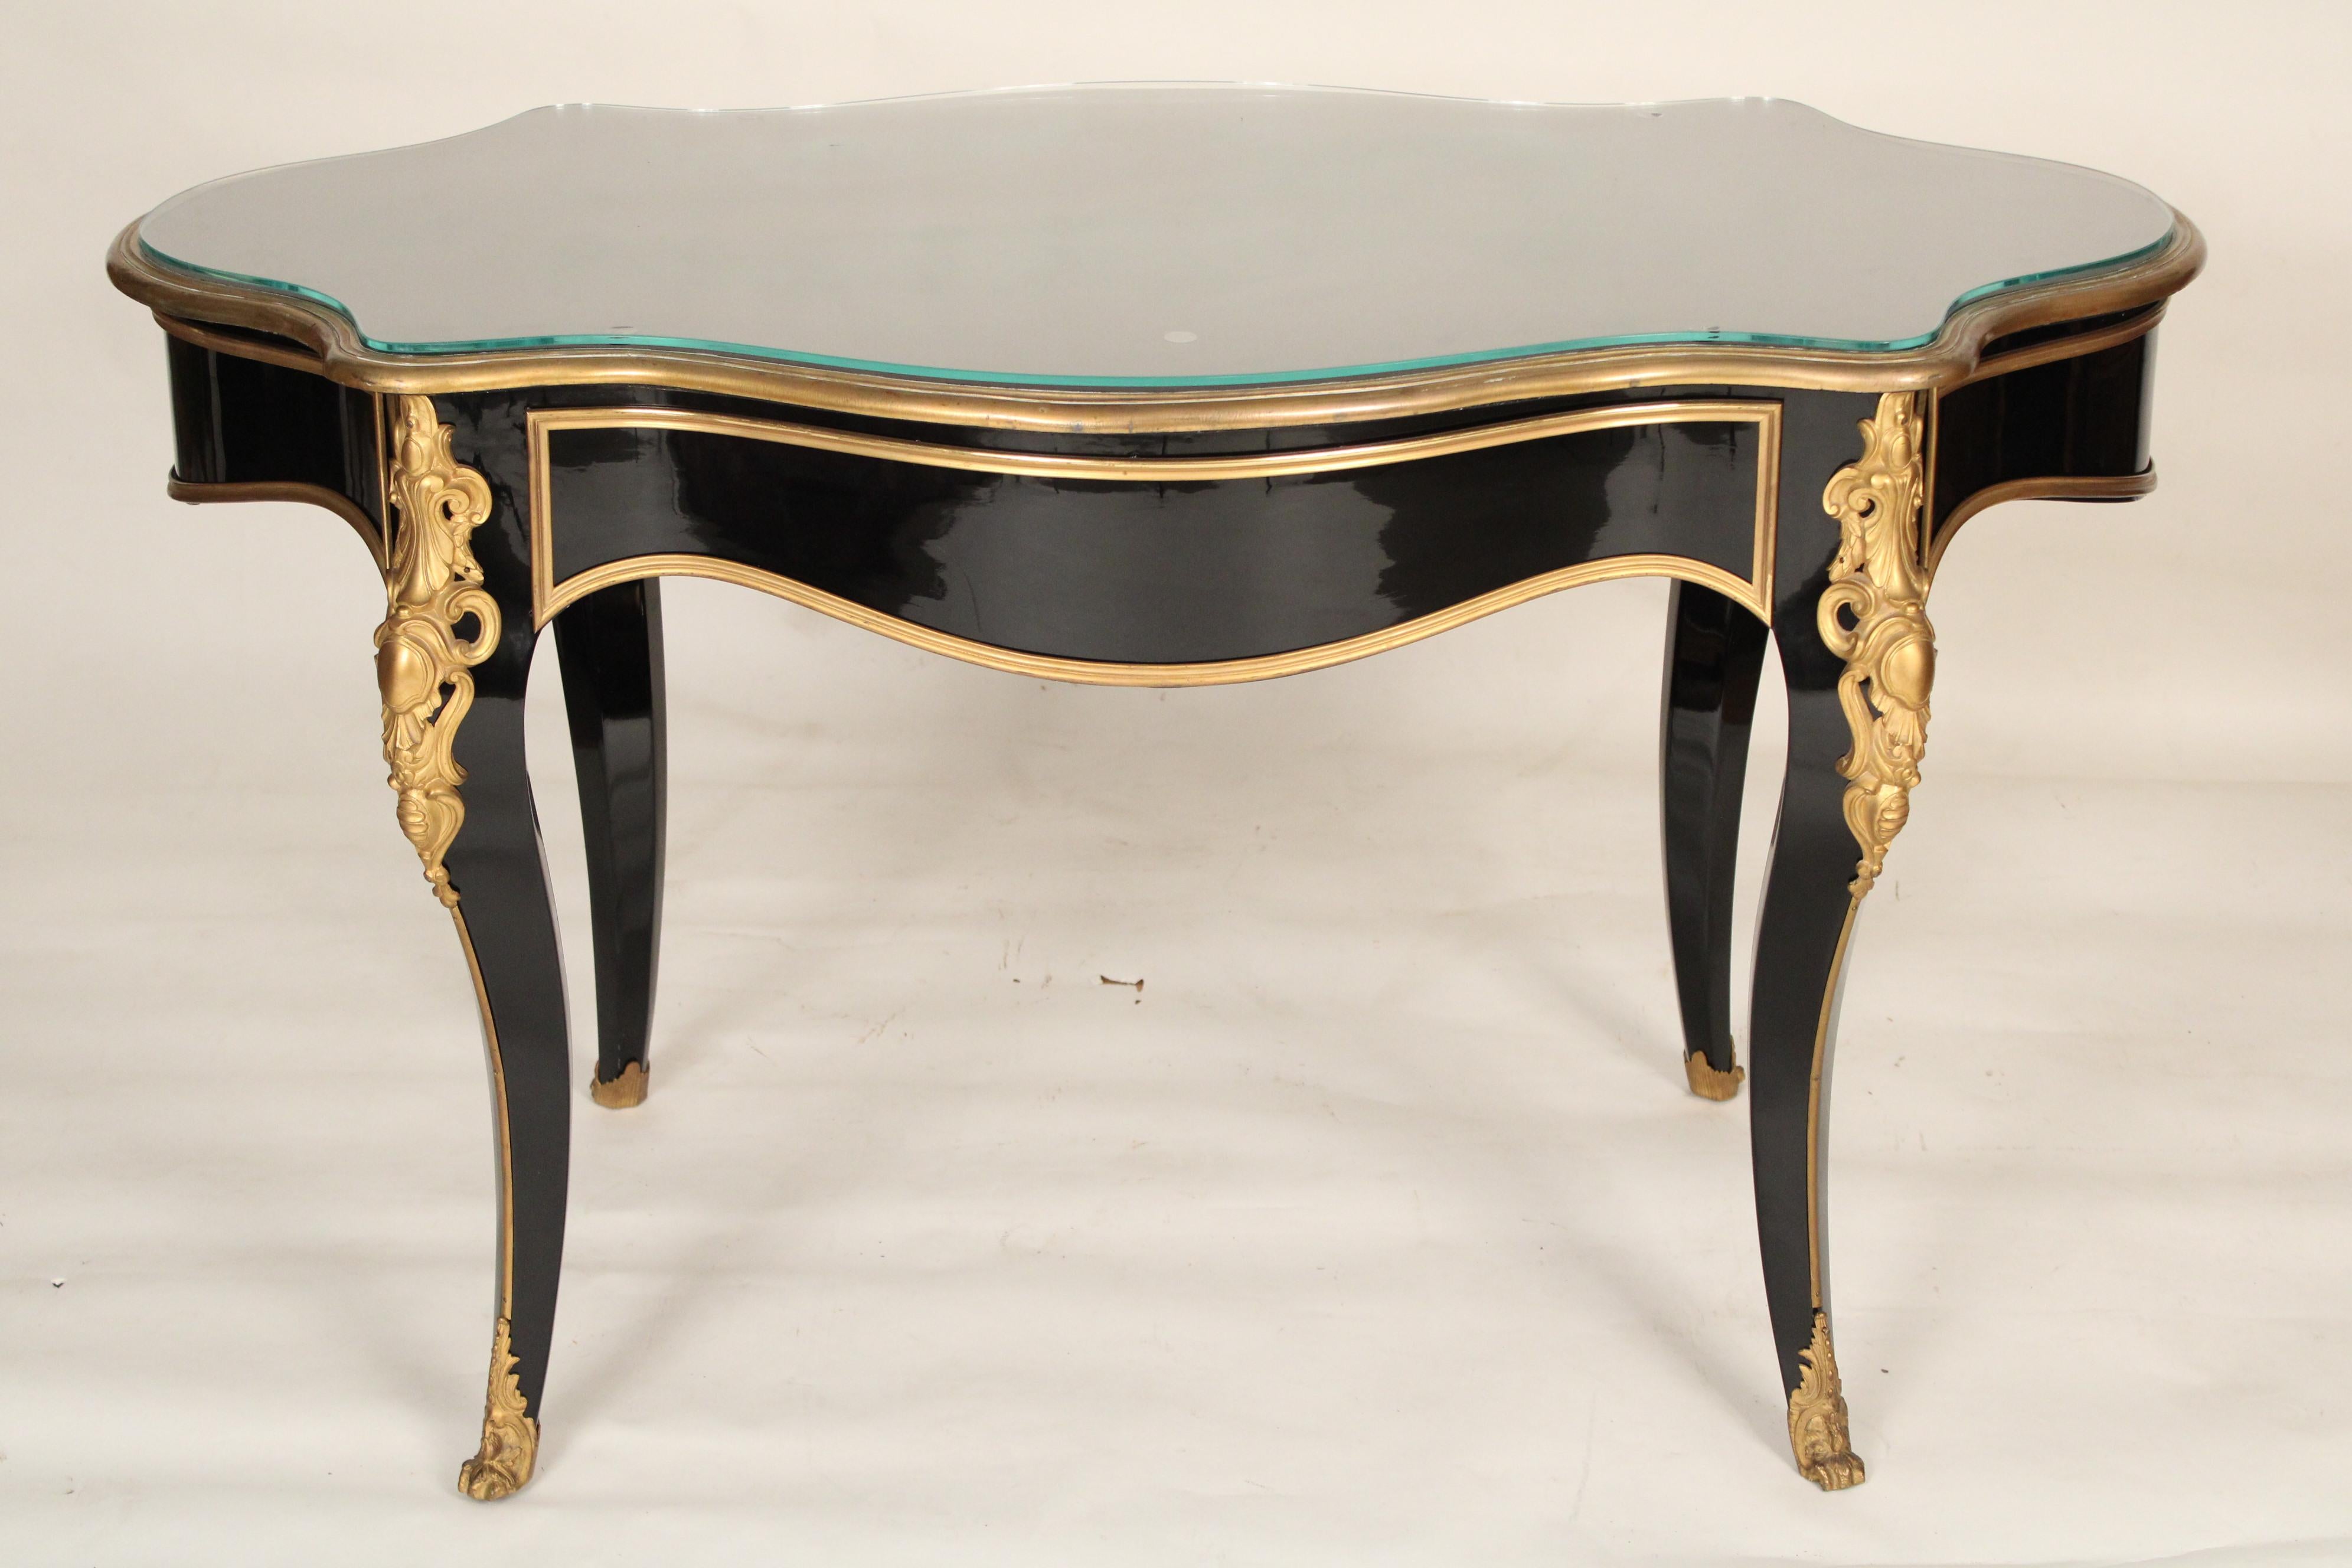 Napoleon III black lacquer and gilt bronze mounted writing / center table with a glass top, late 19th century. Excellent quality late 20th century black lacquer finish. Lemon colored gilt bronze mounts. Back of drawers with hand dove tailed drawer